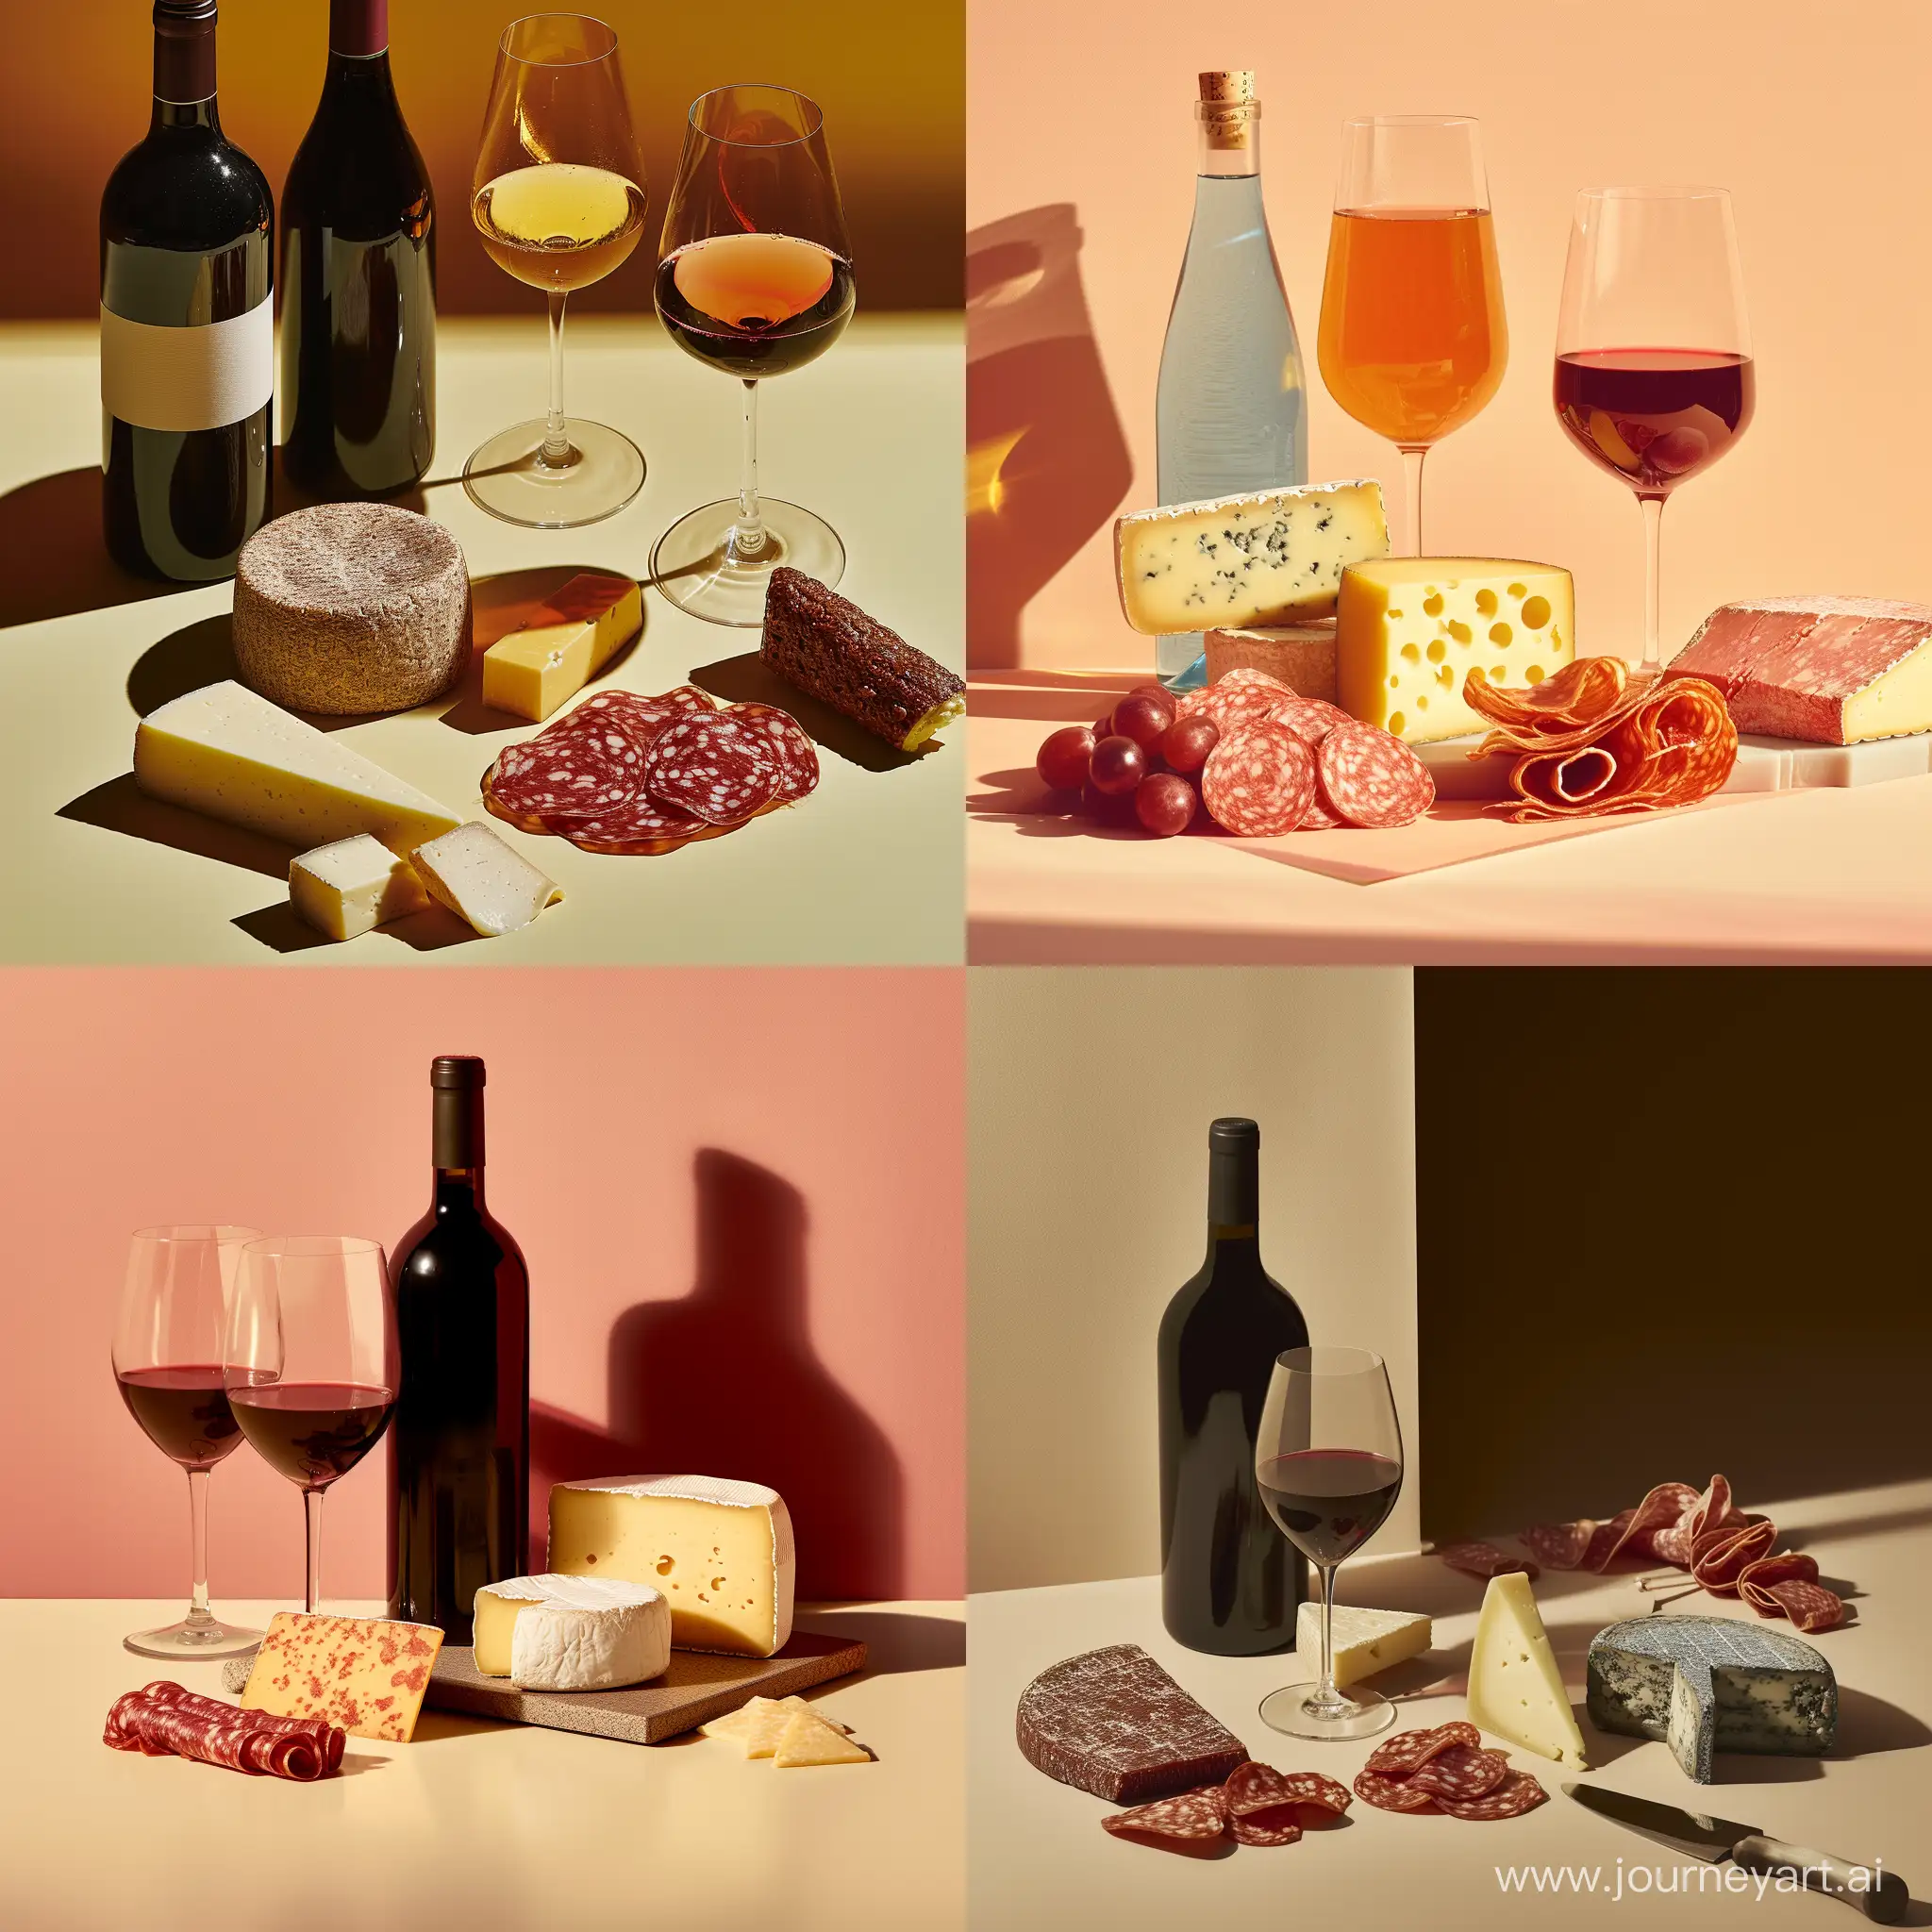 Exquisite-Wine-and-Cheese-Still-Life-HyperRealistic-Commercial-Photography